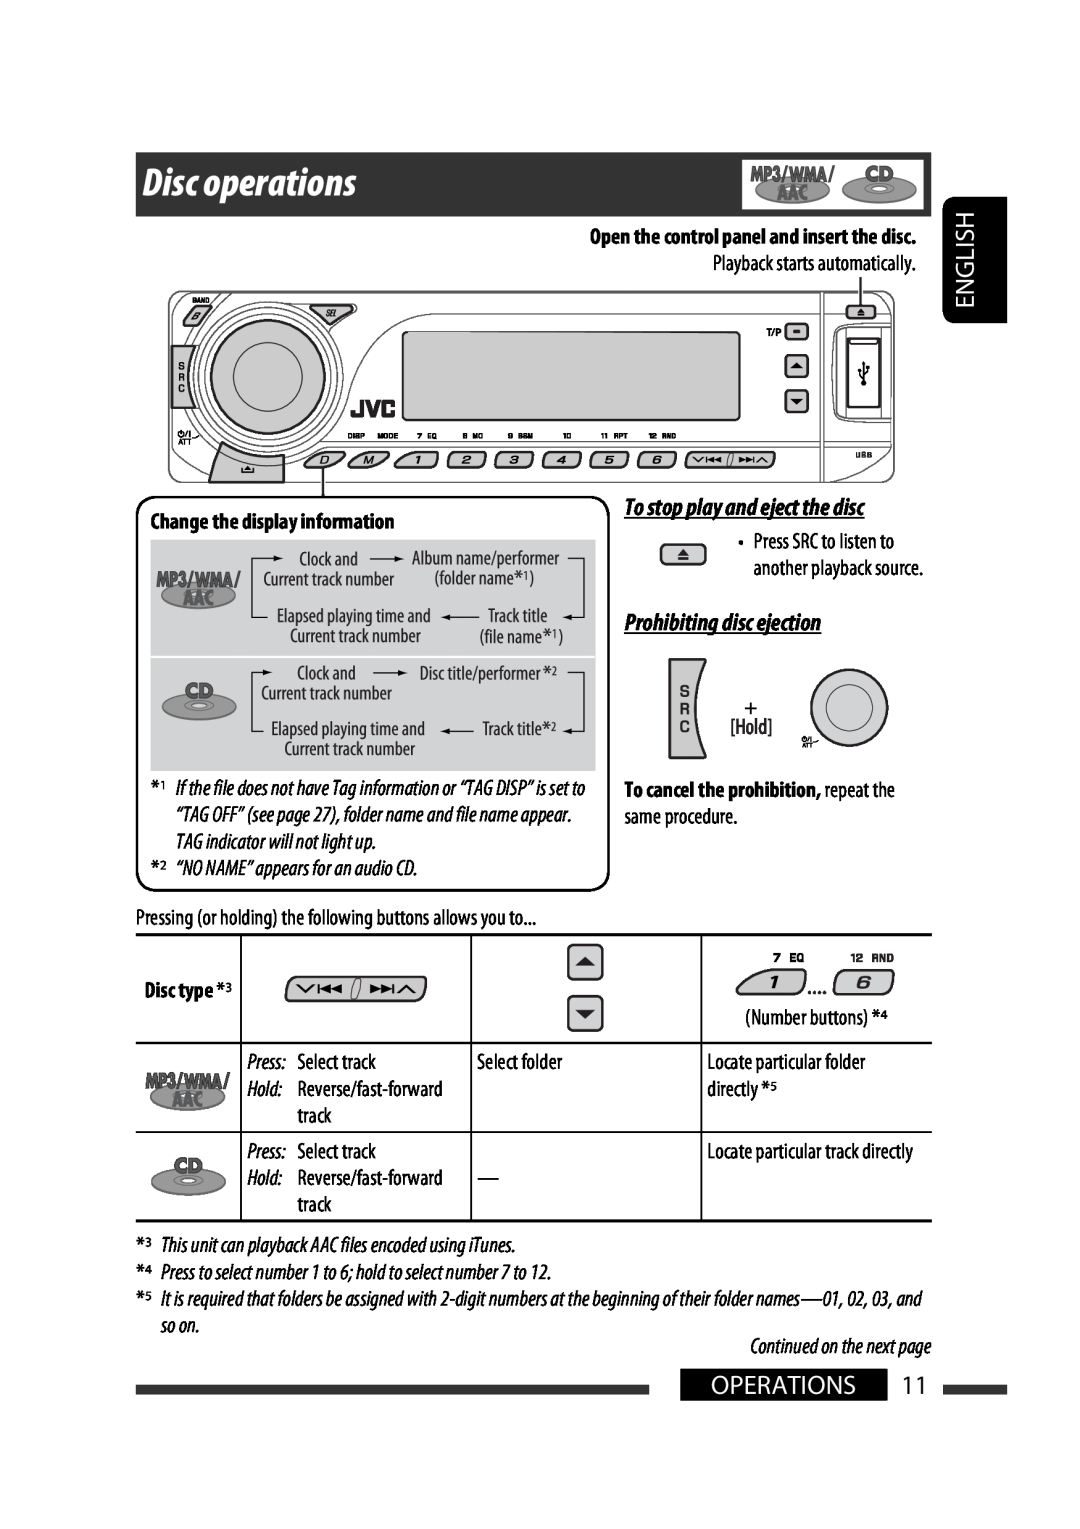 JVC KD-G731 Disc operations, To stop play and eject the disc, Prohibiting disc ejection, Disc type *3, English, Operations 